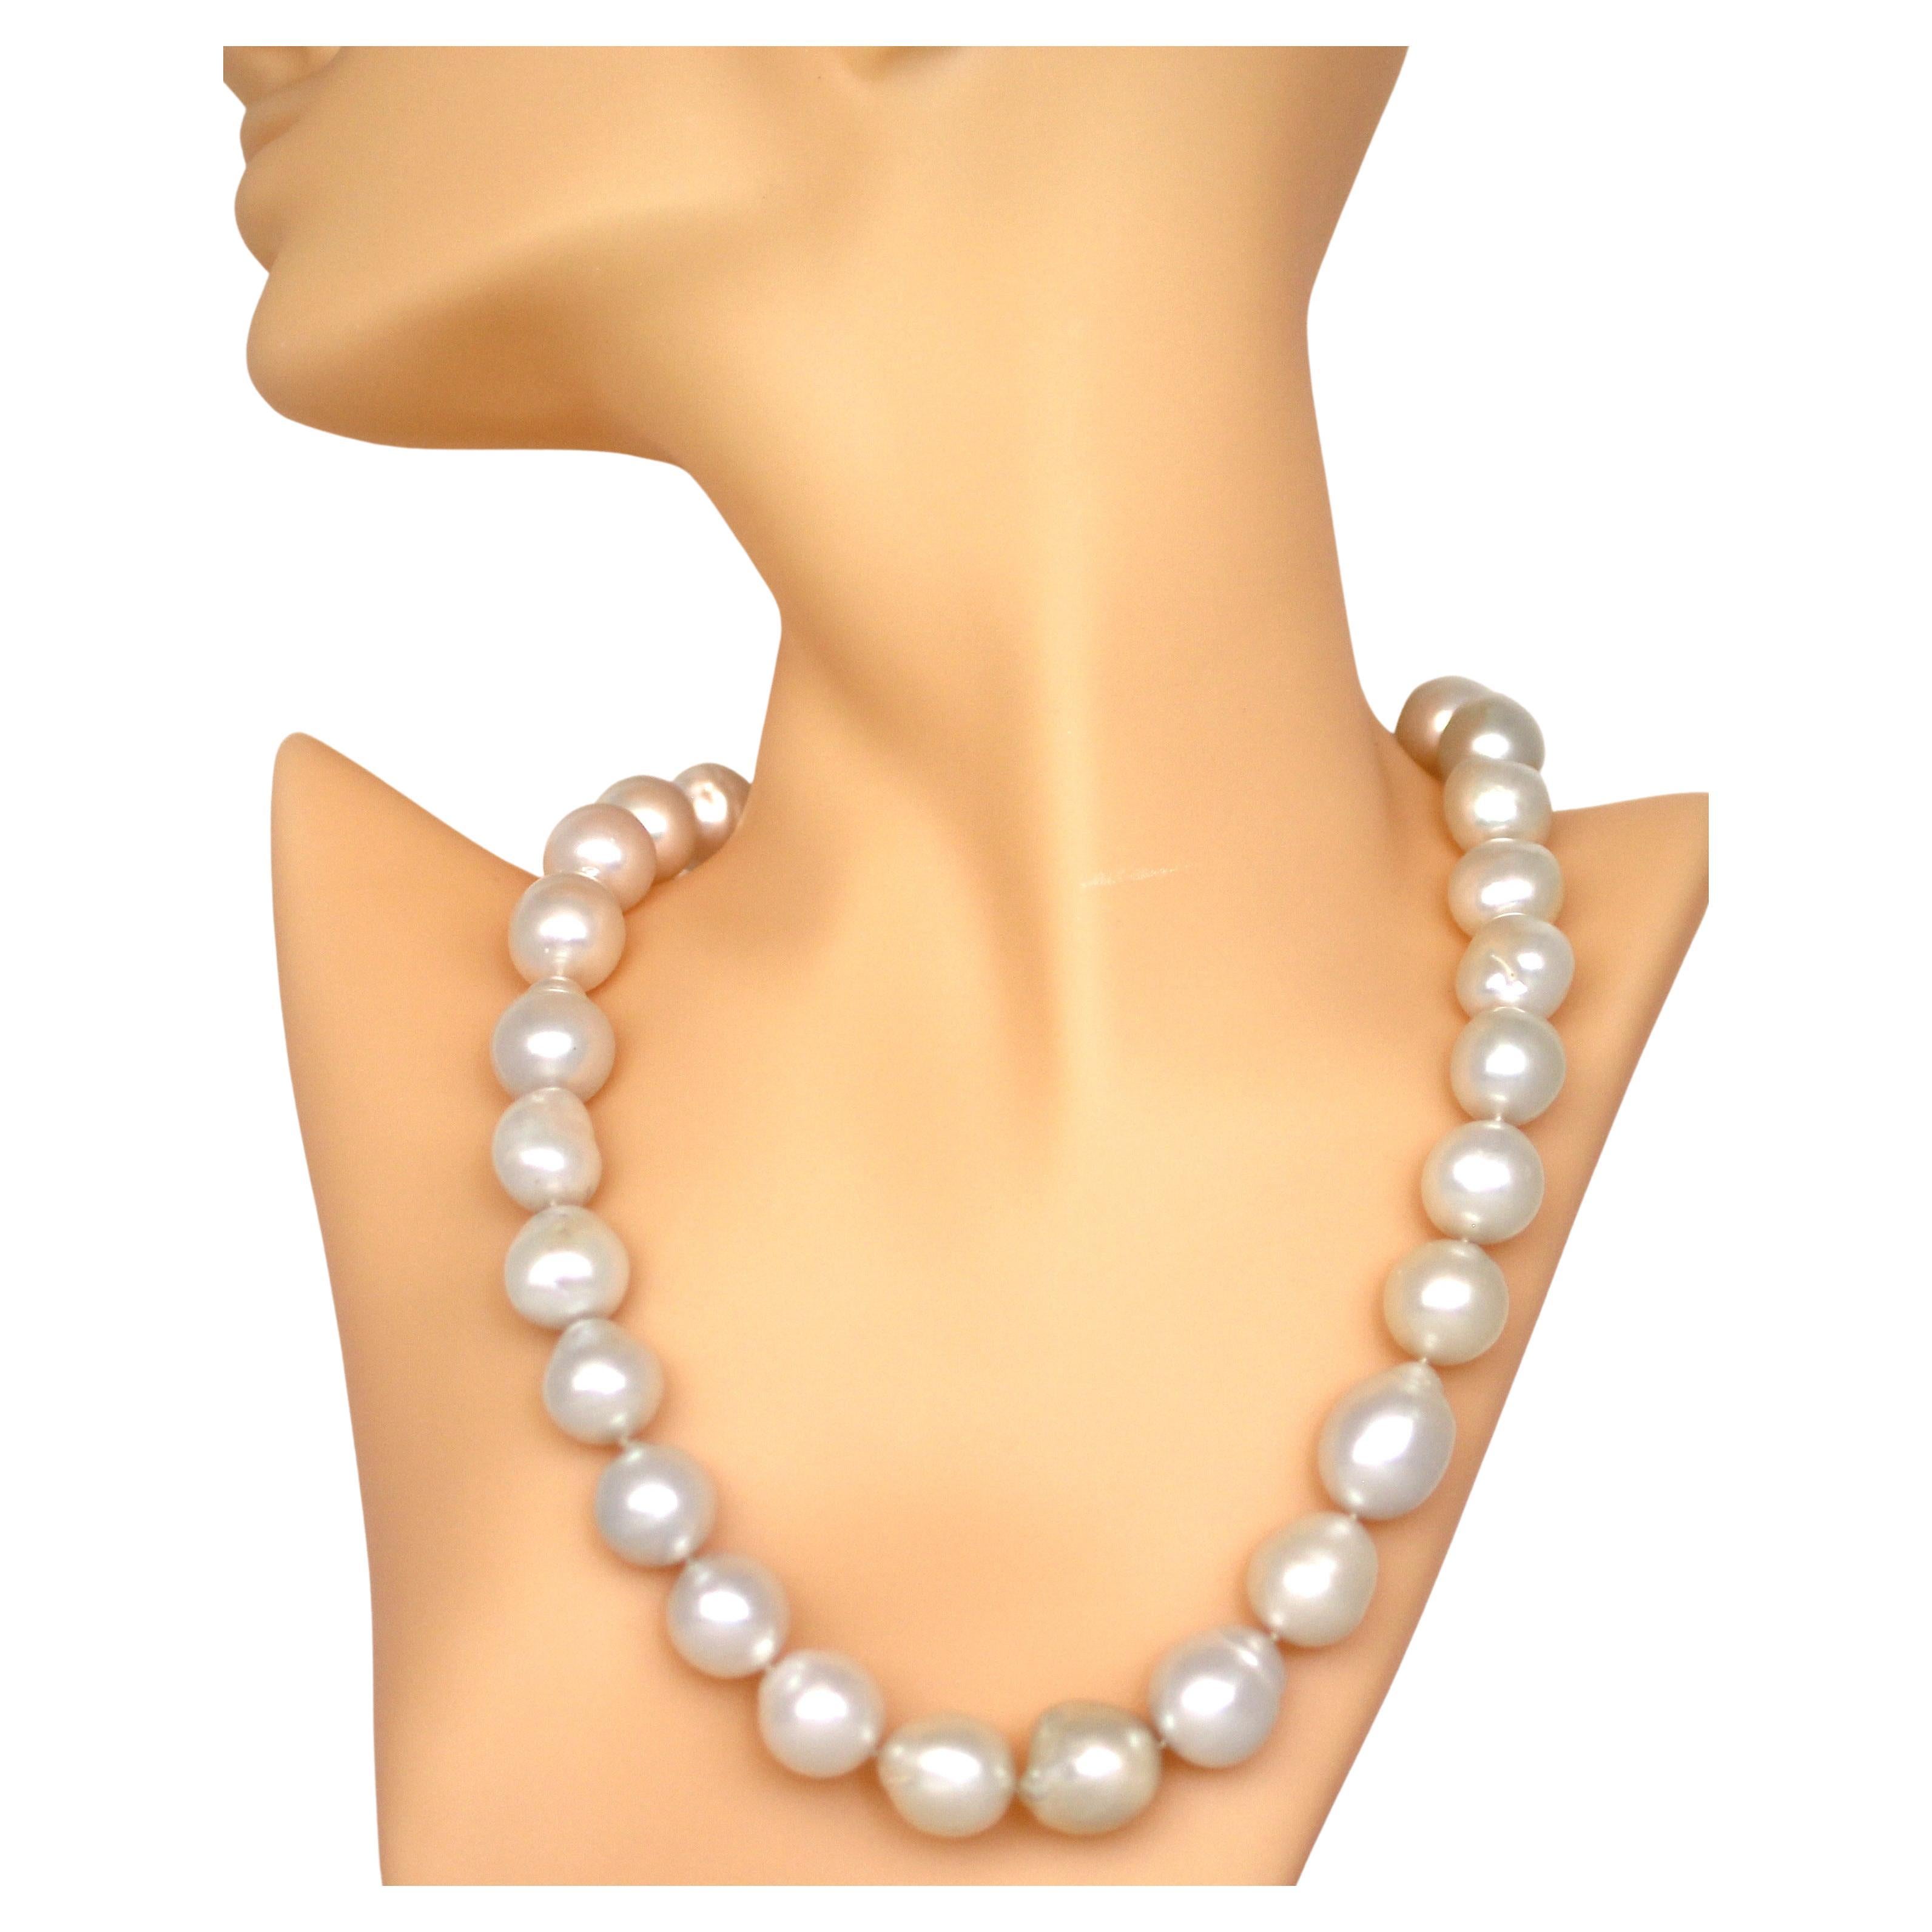 Hakimoto By Jewel Of Ocean 18K South Sea Strand Necklace
18K White Gold  
Weight (g): 124
Cultured Natural White South Sea Baroque Pearl 
Pearl Size: 14X15mm 
Pearl Shape: Baroque 
Body color: Natural White 
Orient: Very Good
Luster: Very Good